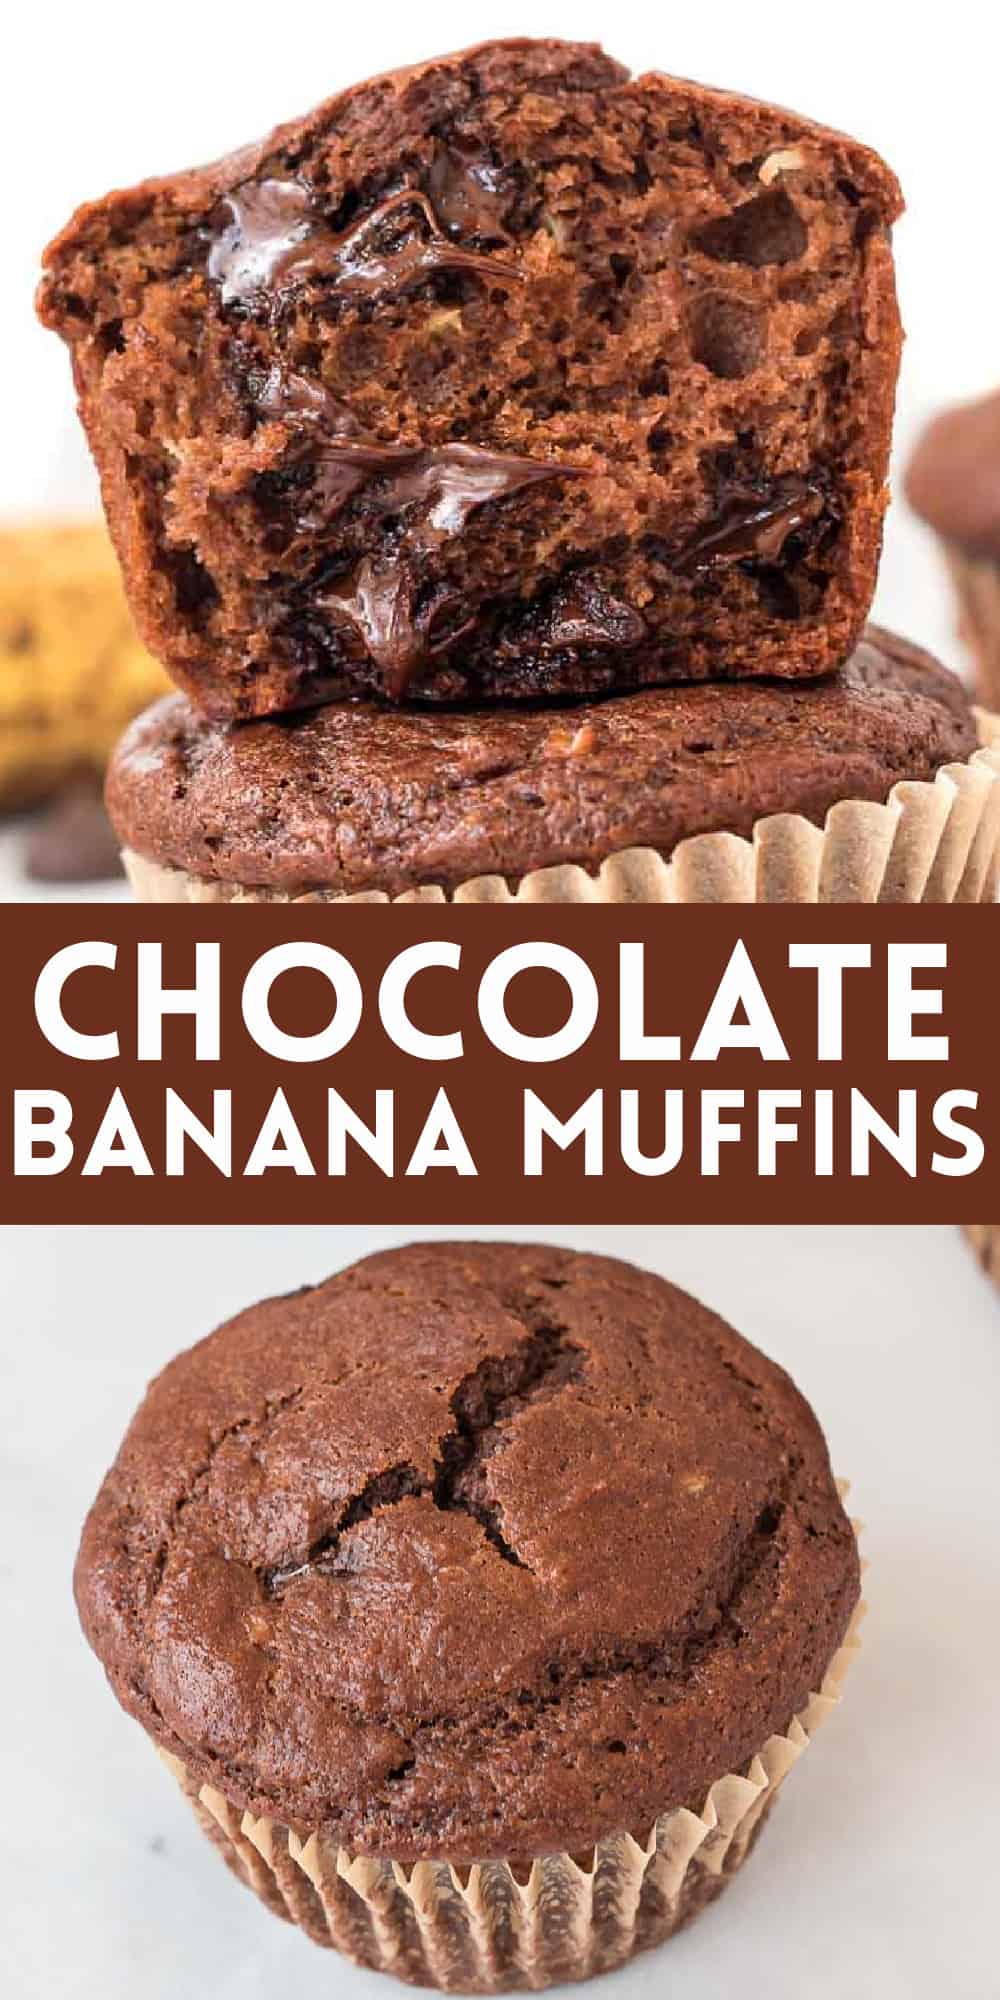 image with text "chocolate banana muffins"